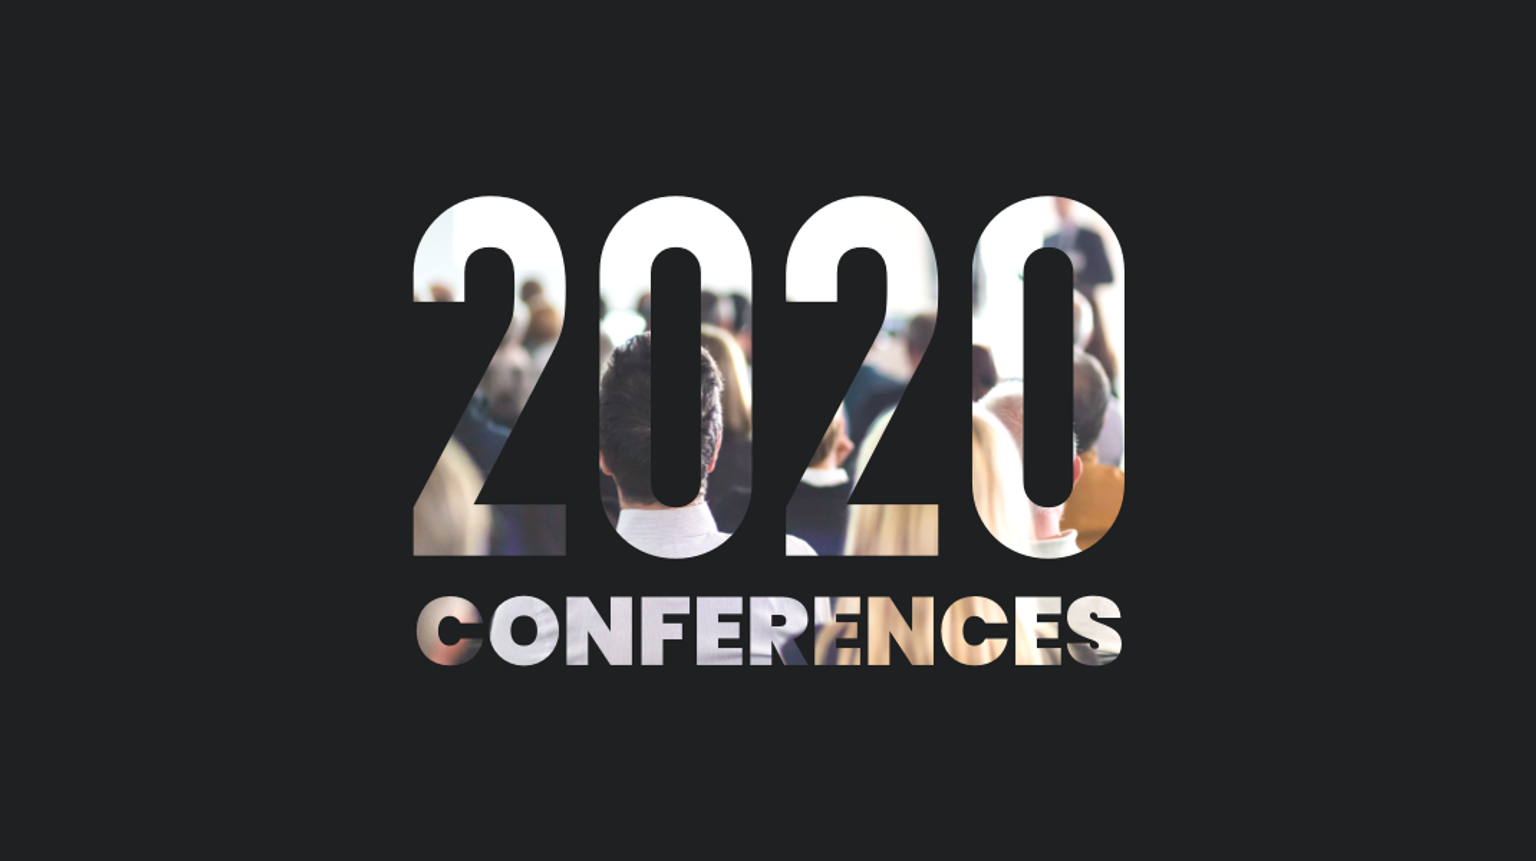 The 2020 Marketing Conference Forecast